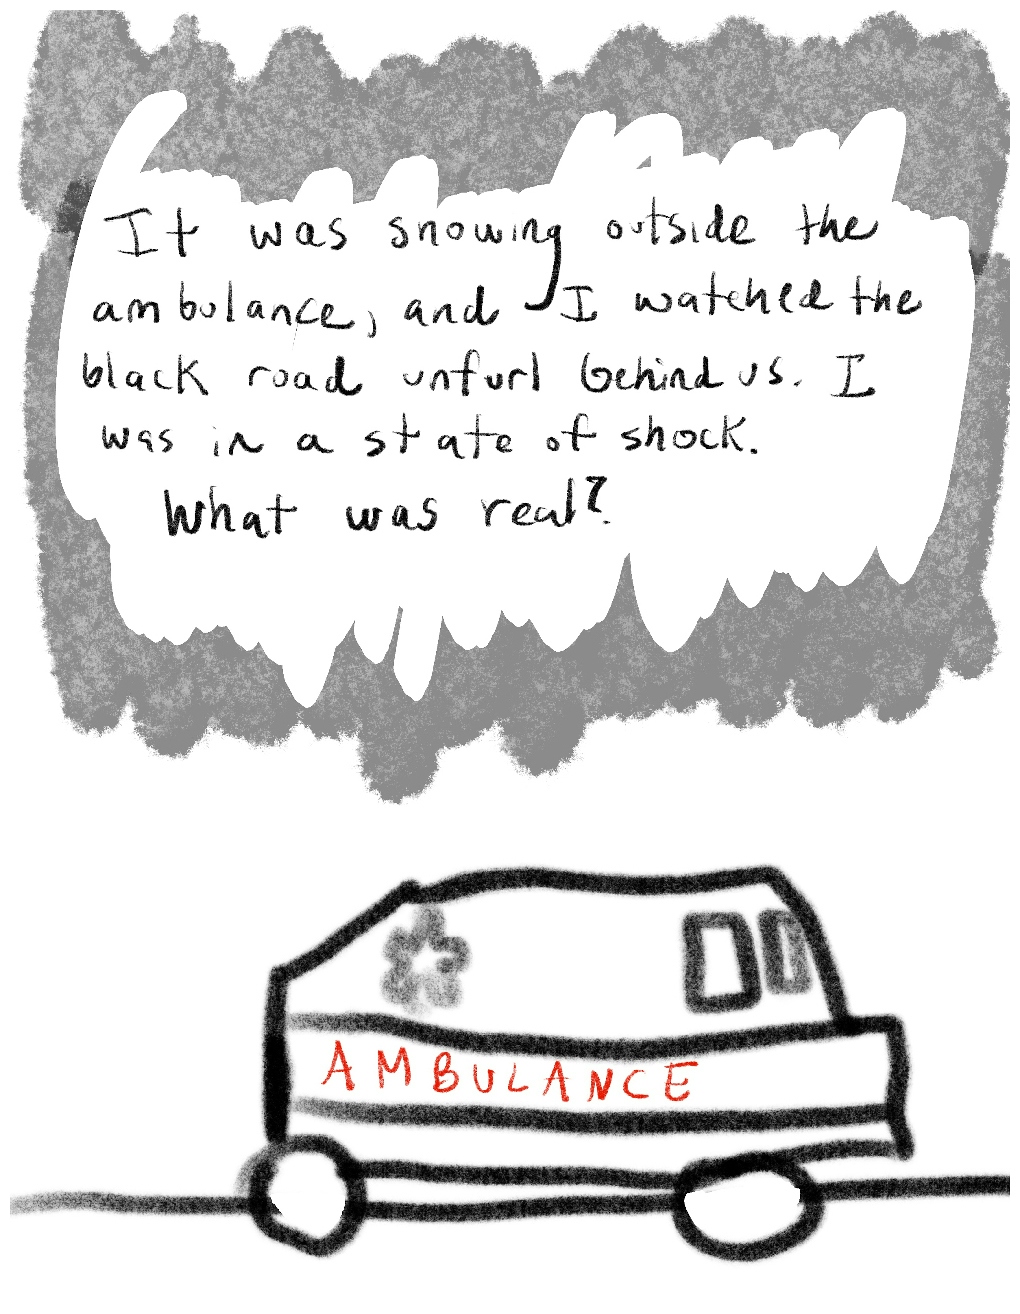 Panel two of a four-panel comic called 'From psychotic to patient', consisting of thick black line drawing and hand written text against a white background. An ambulance drives along a flat road across the lower half of the panel. Above the ambulance in the top half of the panel, text surrounded by  a mottled grey 'cloud' reads "It was snowing outside the ambulance, and I watched the black road unfurl behind us. I was in a state of shock. What was real?"  